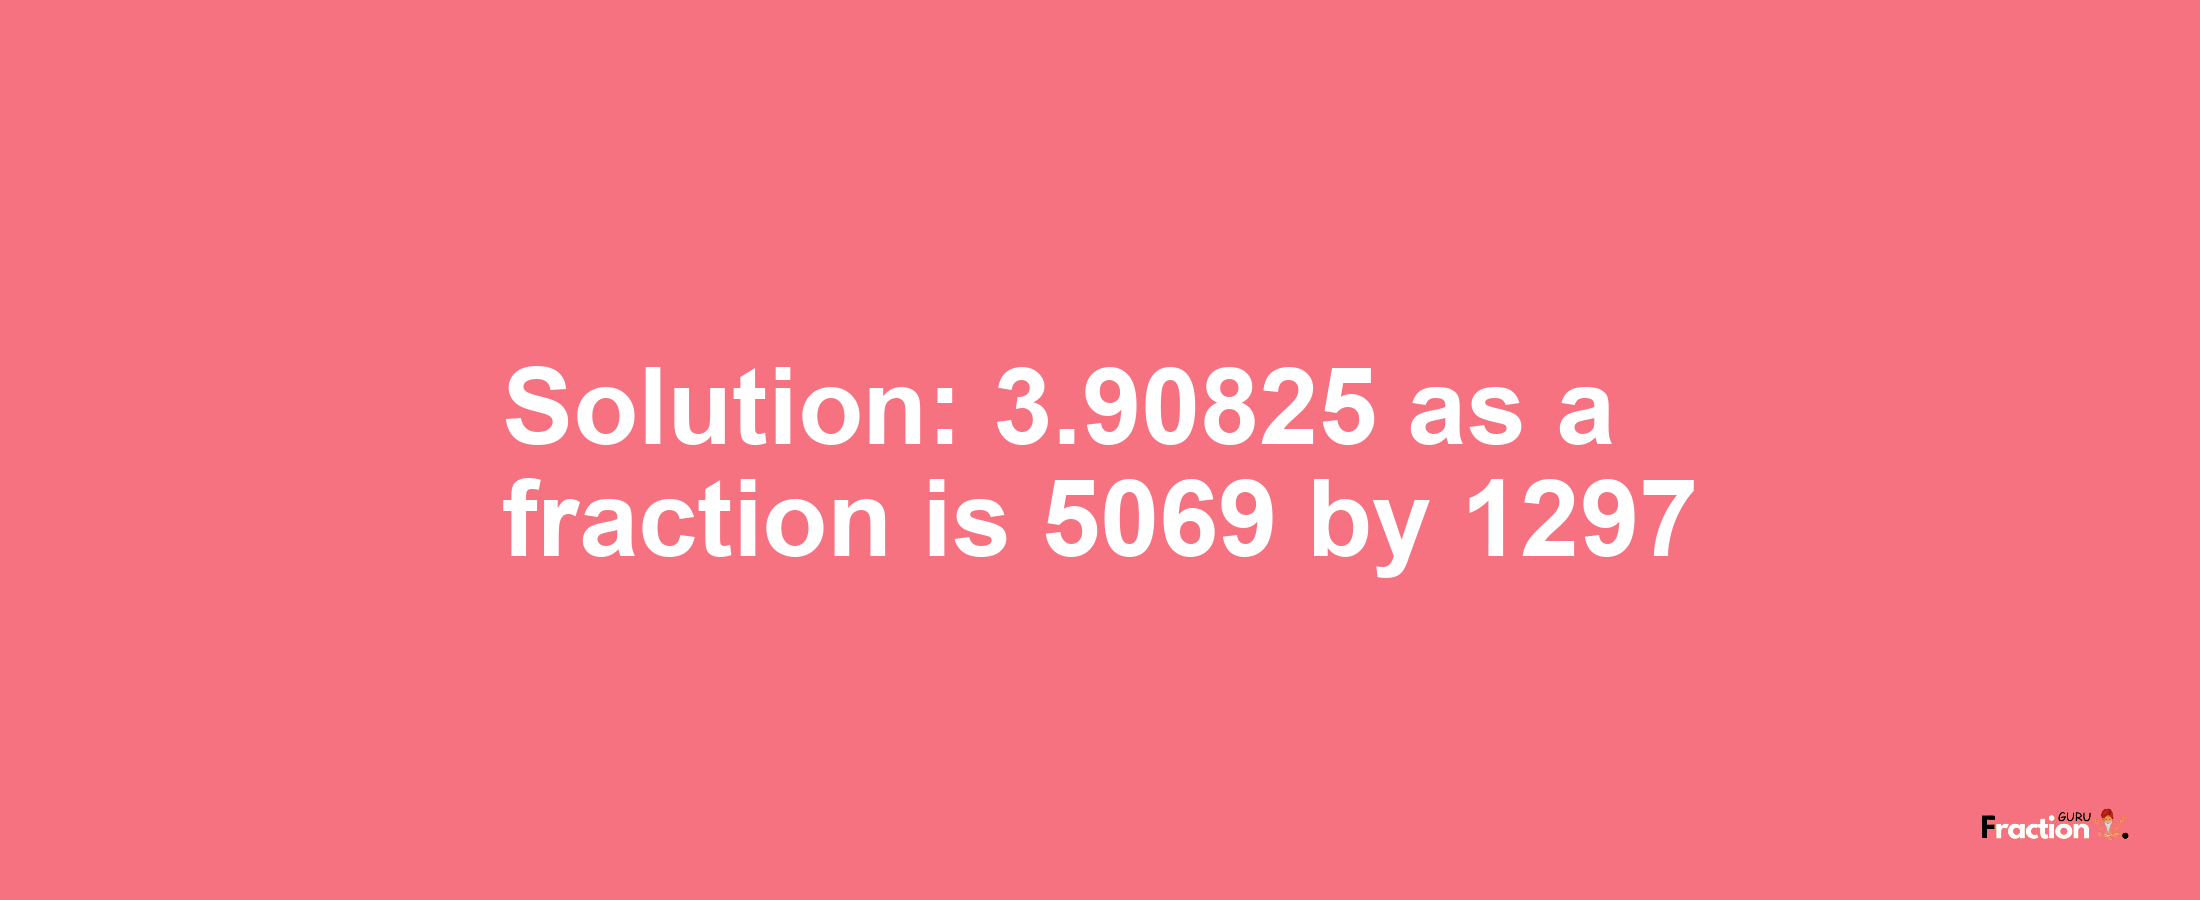 Solution:3.90825 as a fraction is 5069/1297